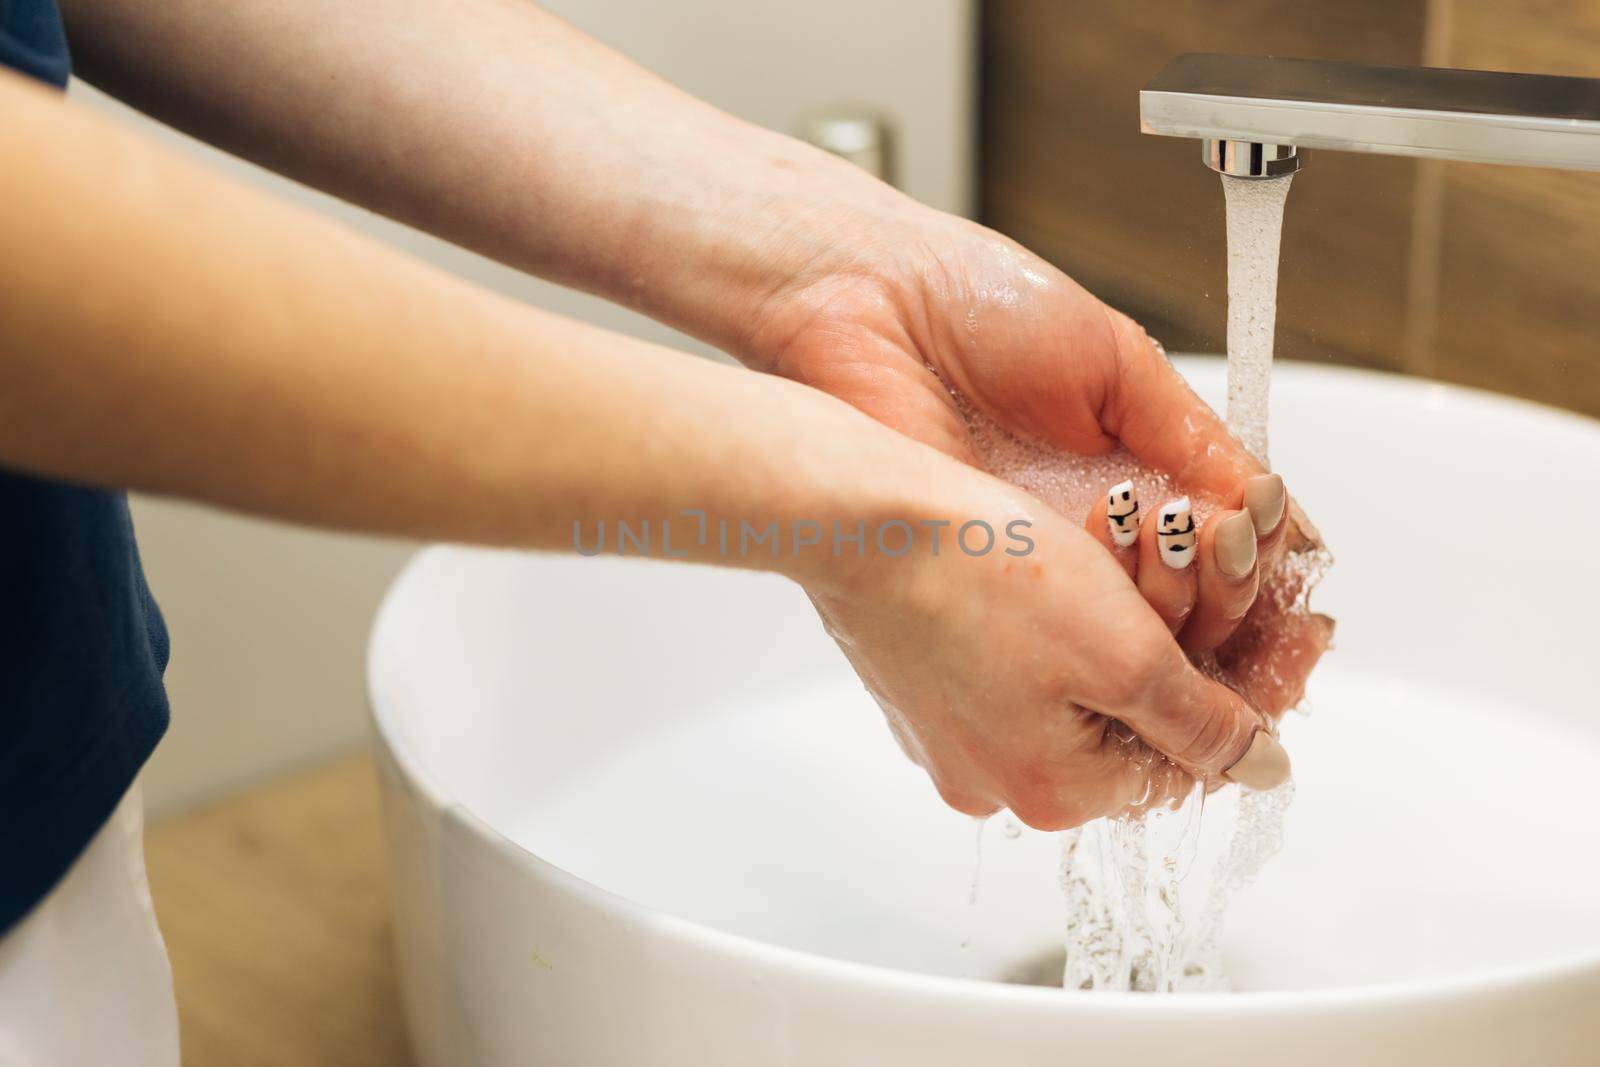 Hands of woman wash their hands in a sink to wash the skin and water flows through the hands. Concept of health, cleaning and preventing germs and coronavirus from contacting hands. by uflypro